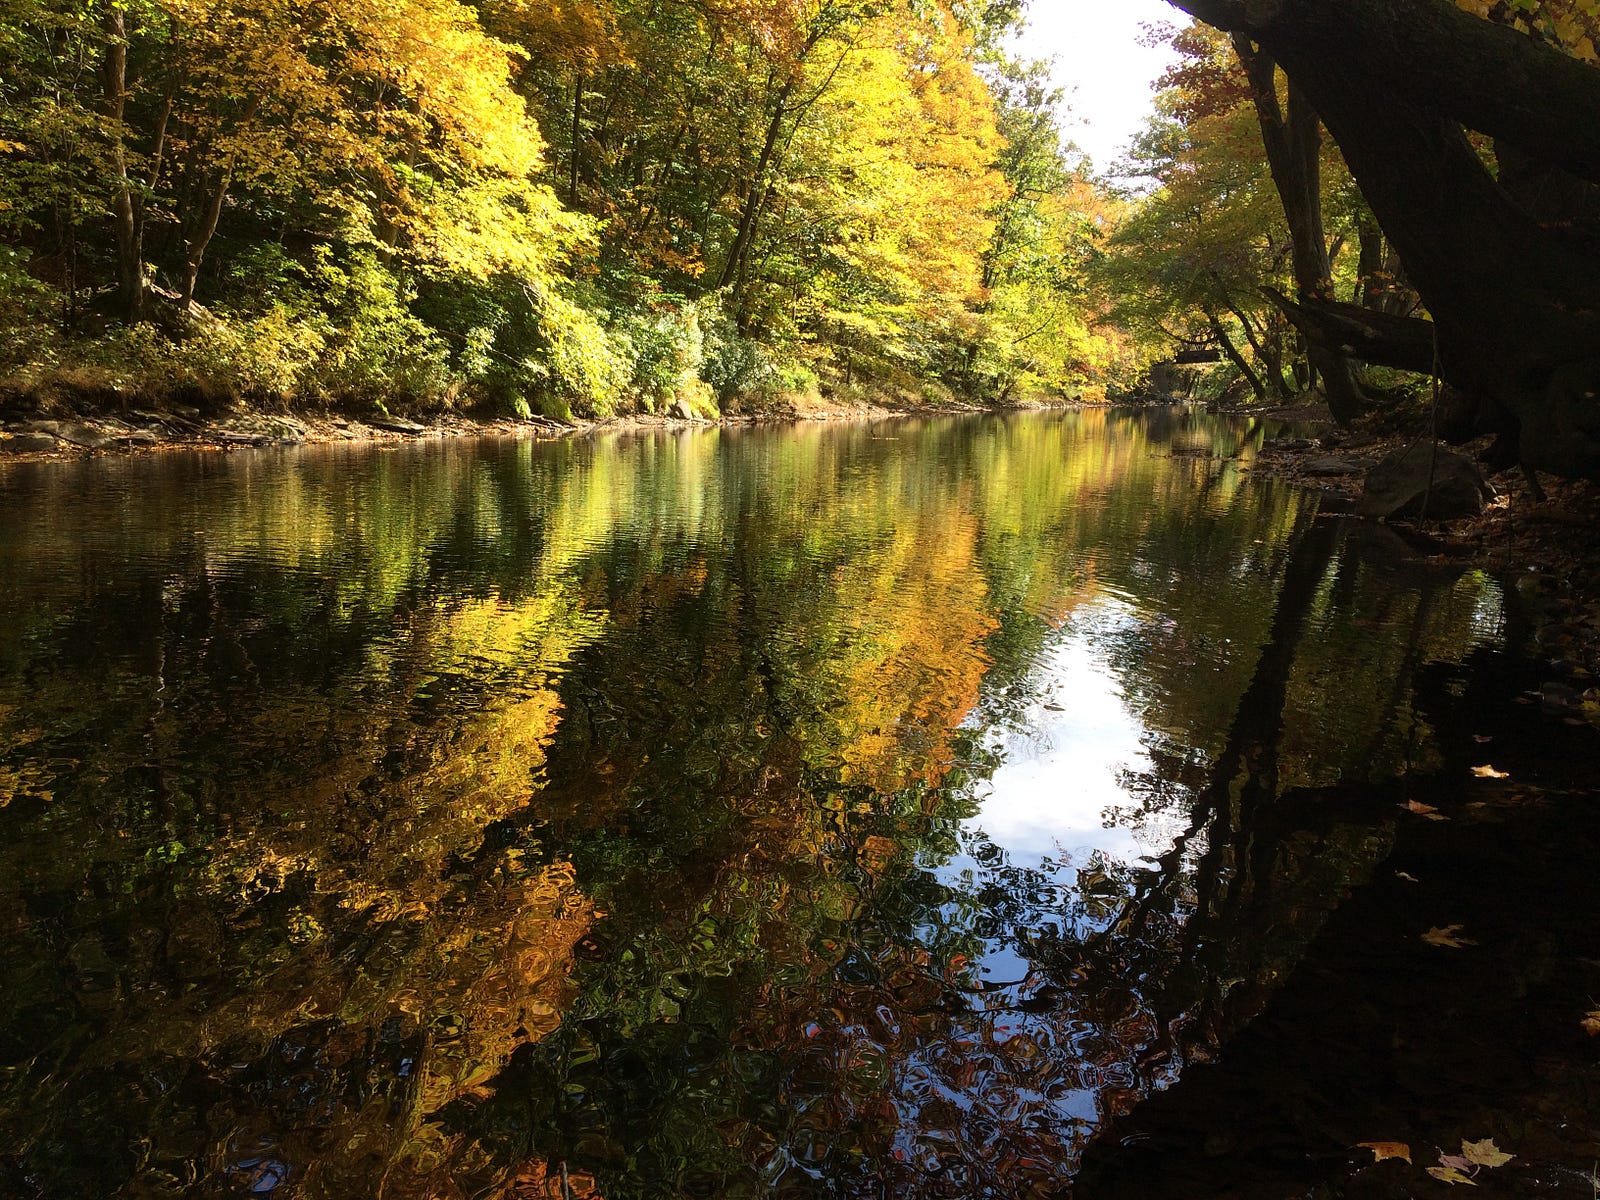 Photo from the bank of the Yantic River as it flows slowly through the village of Yantic, CT. The orange and yellow leaves of fall decorate the river banks.